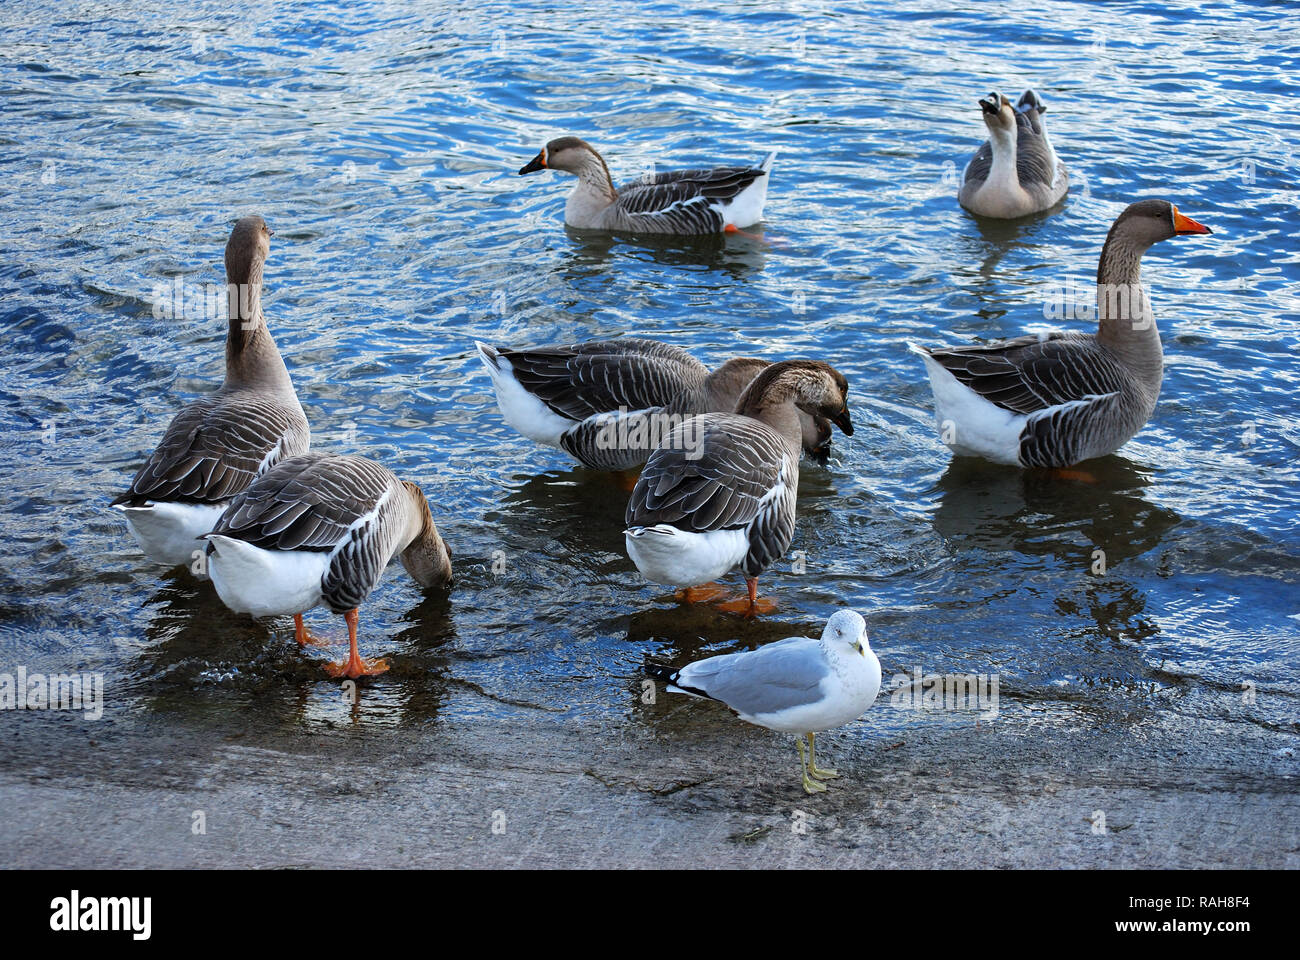 Chinese geese waddle in water of Lake Ontario Stock Photo